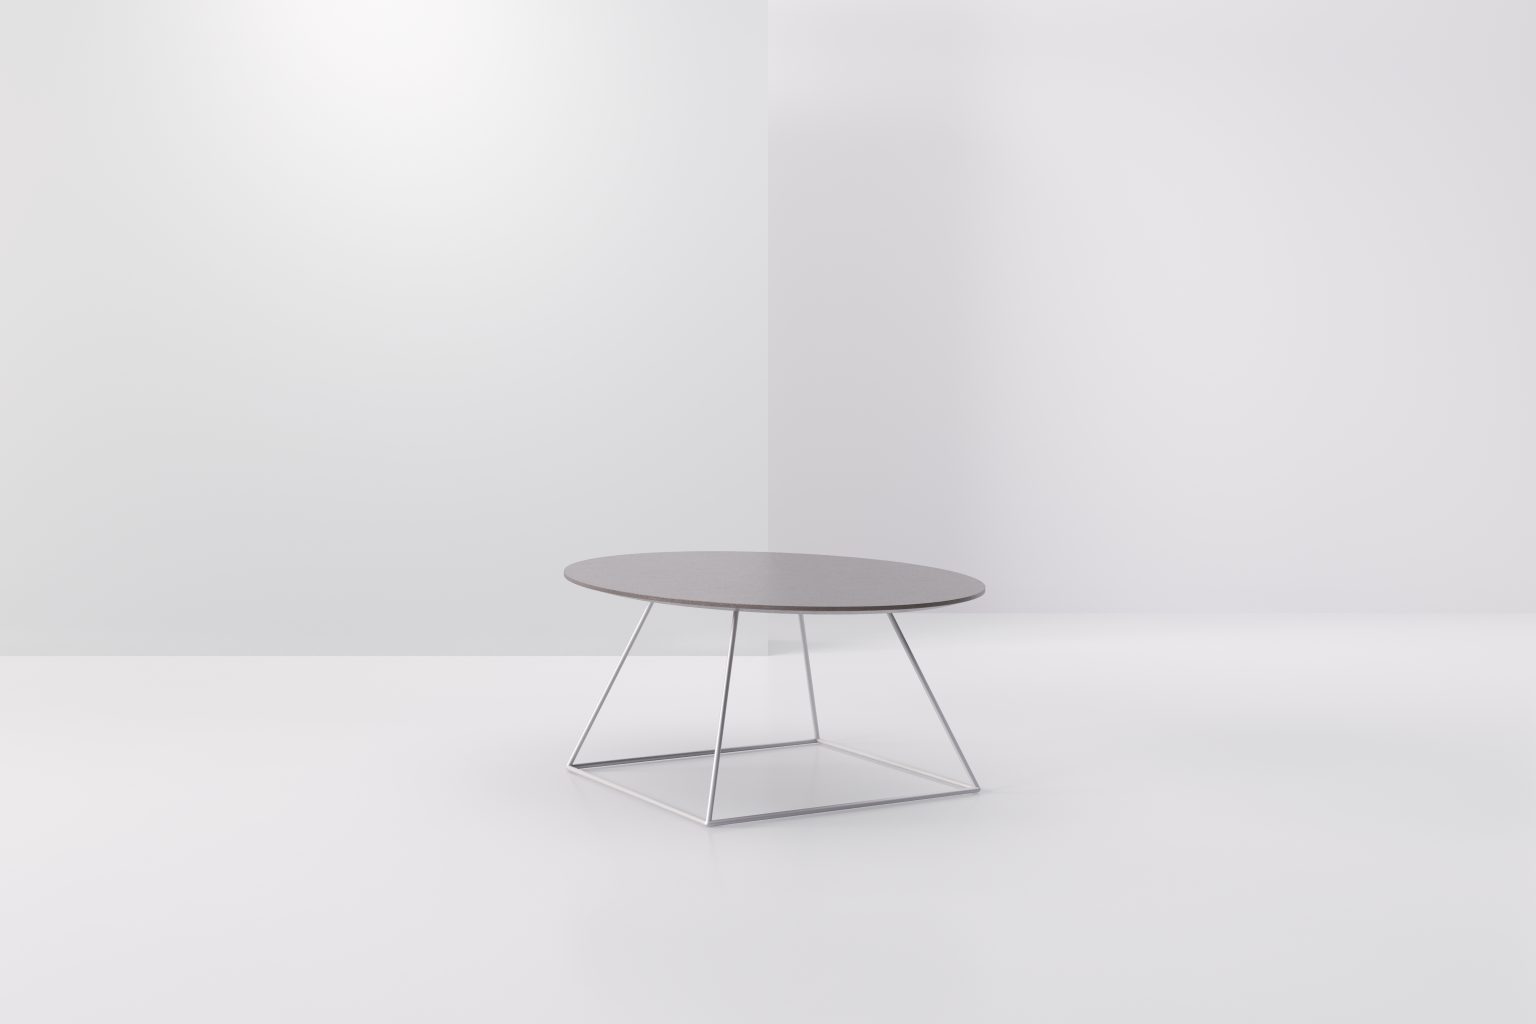 Dayton Large Oval Cocktail Table Product Image 1